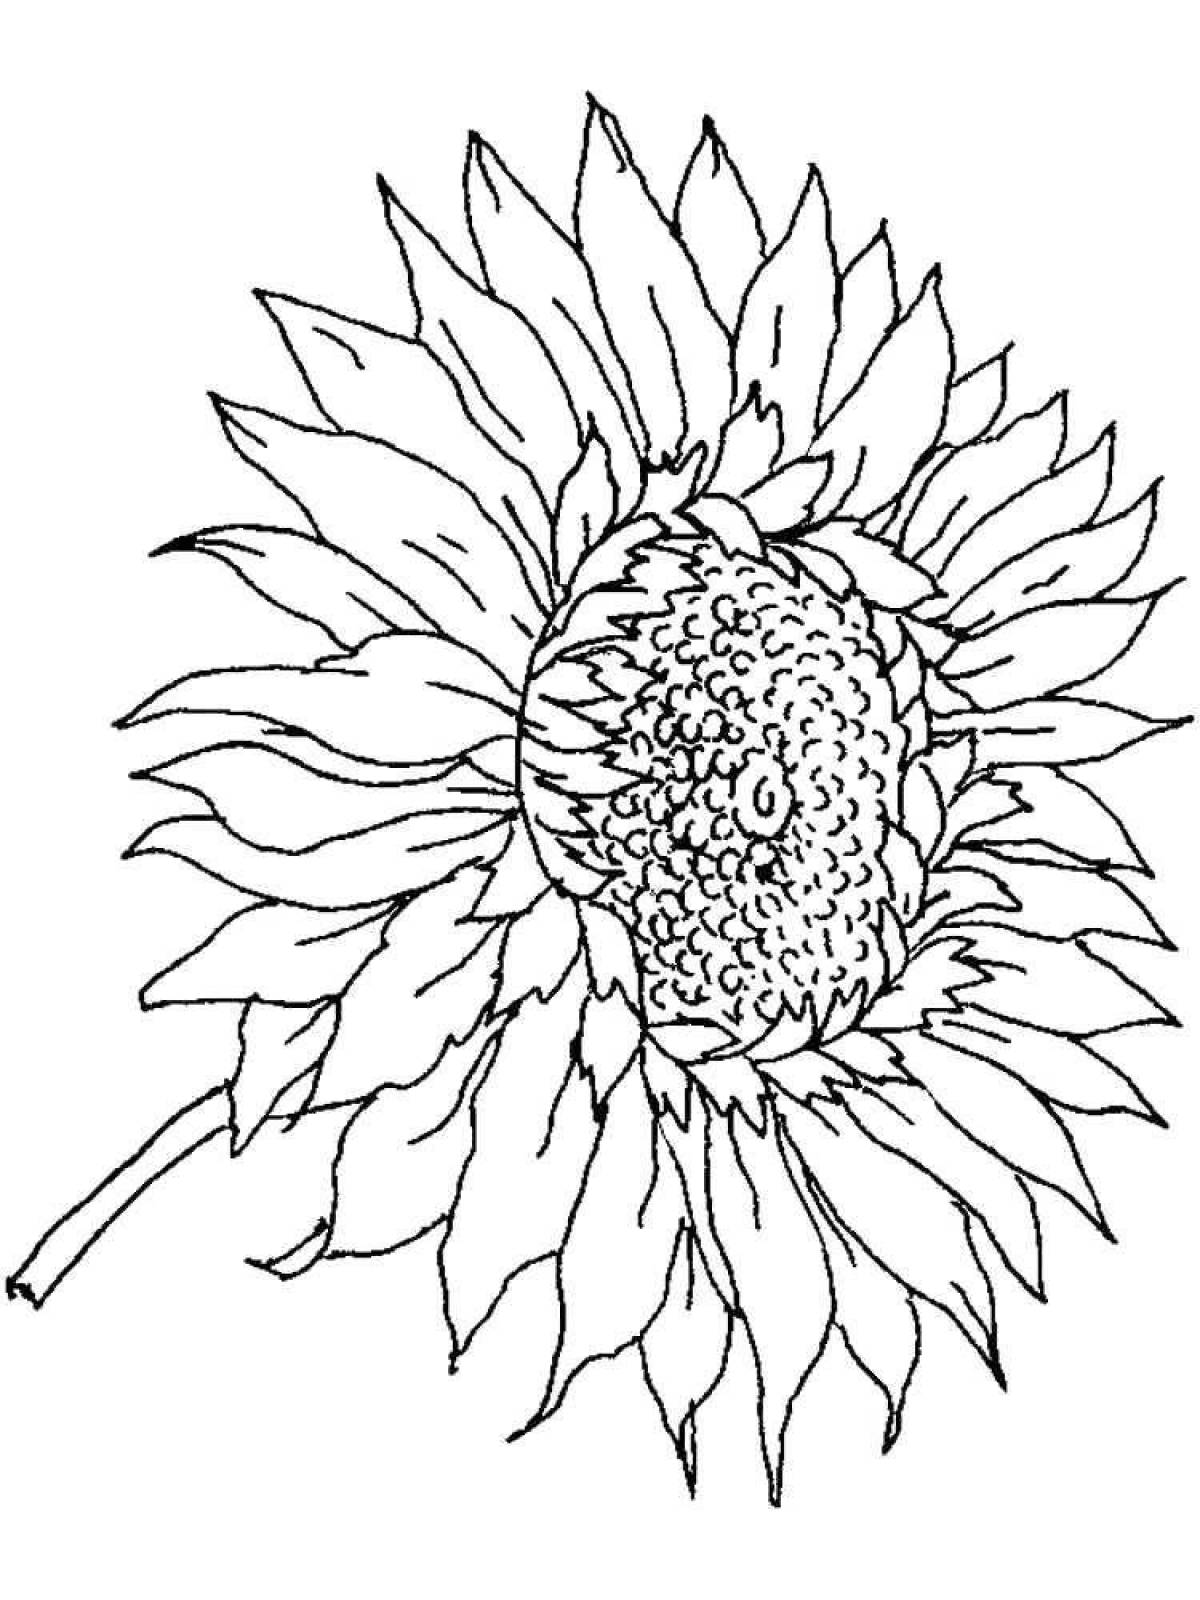 Coloring pages with sunflowers for kids